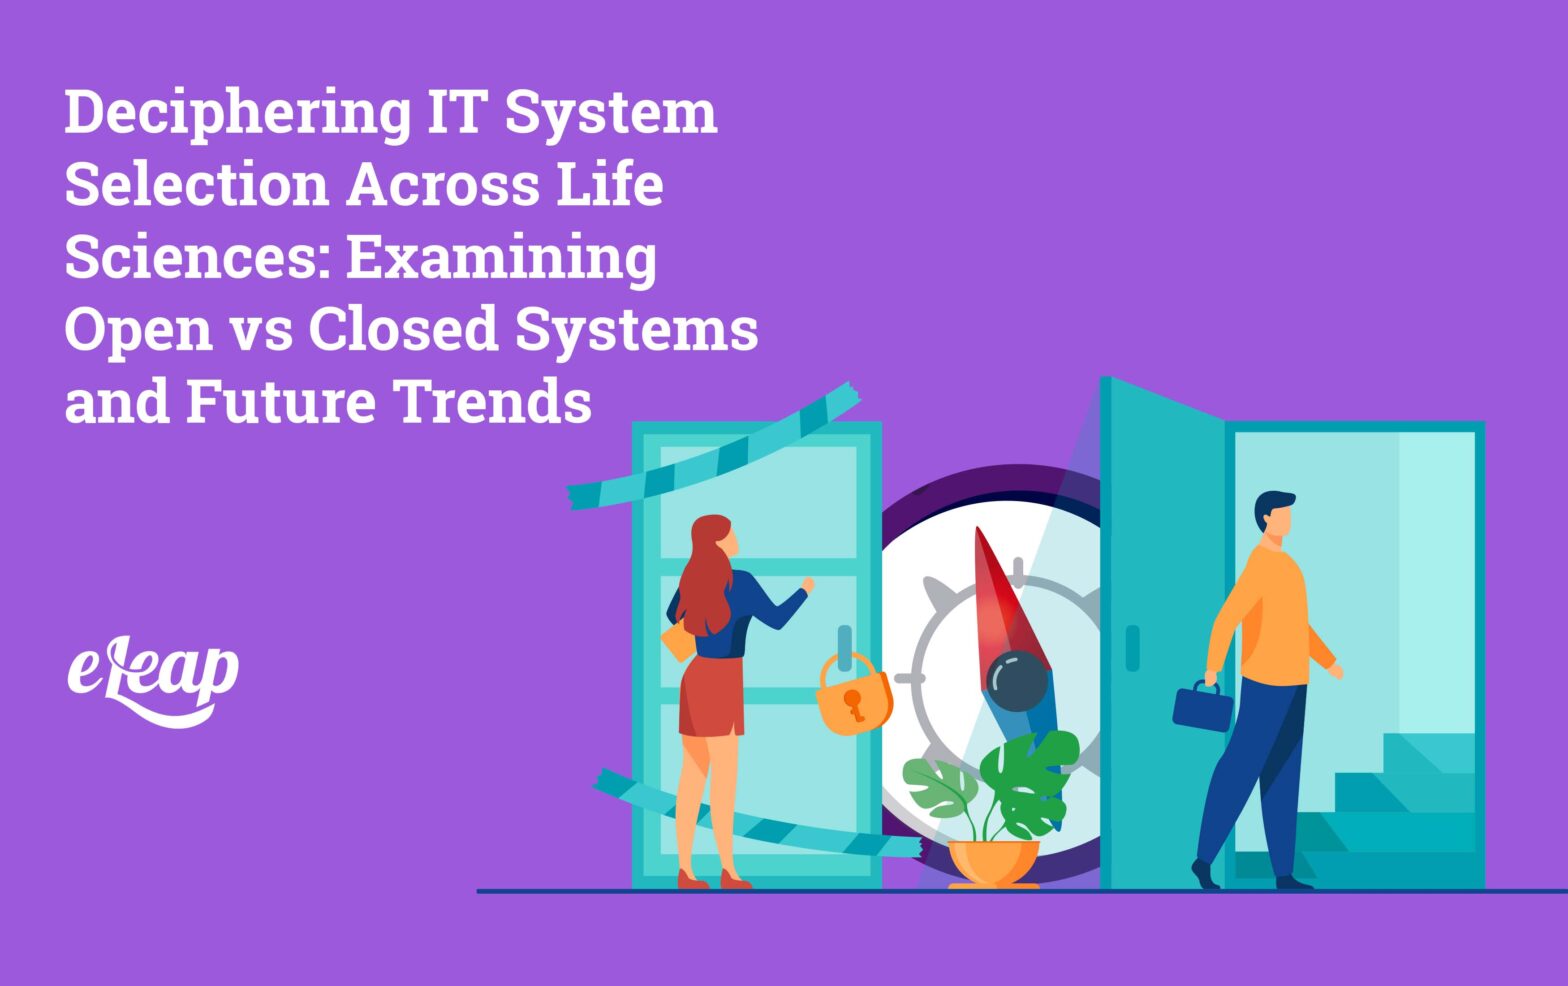 Deciphering IT System Selection Across Life Sciences: Examining Open vs Closed Systems and Future Trends